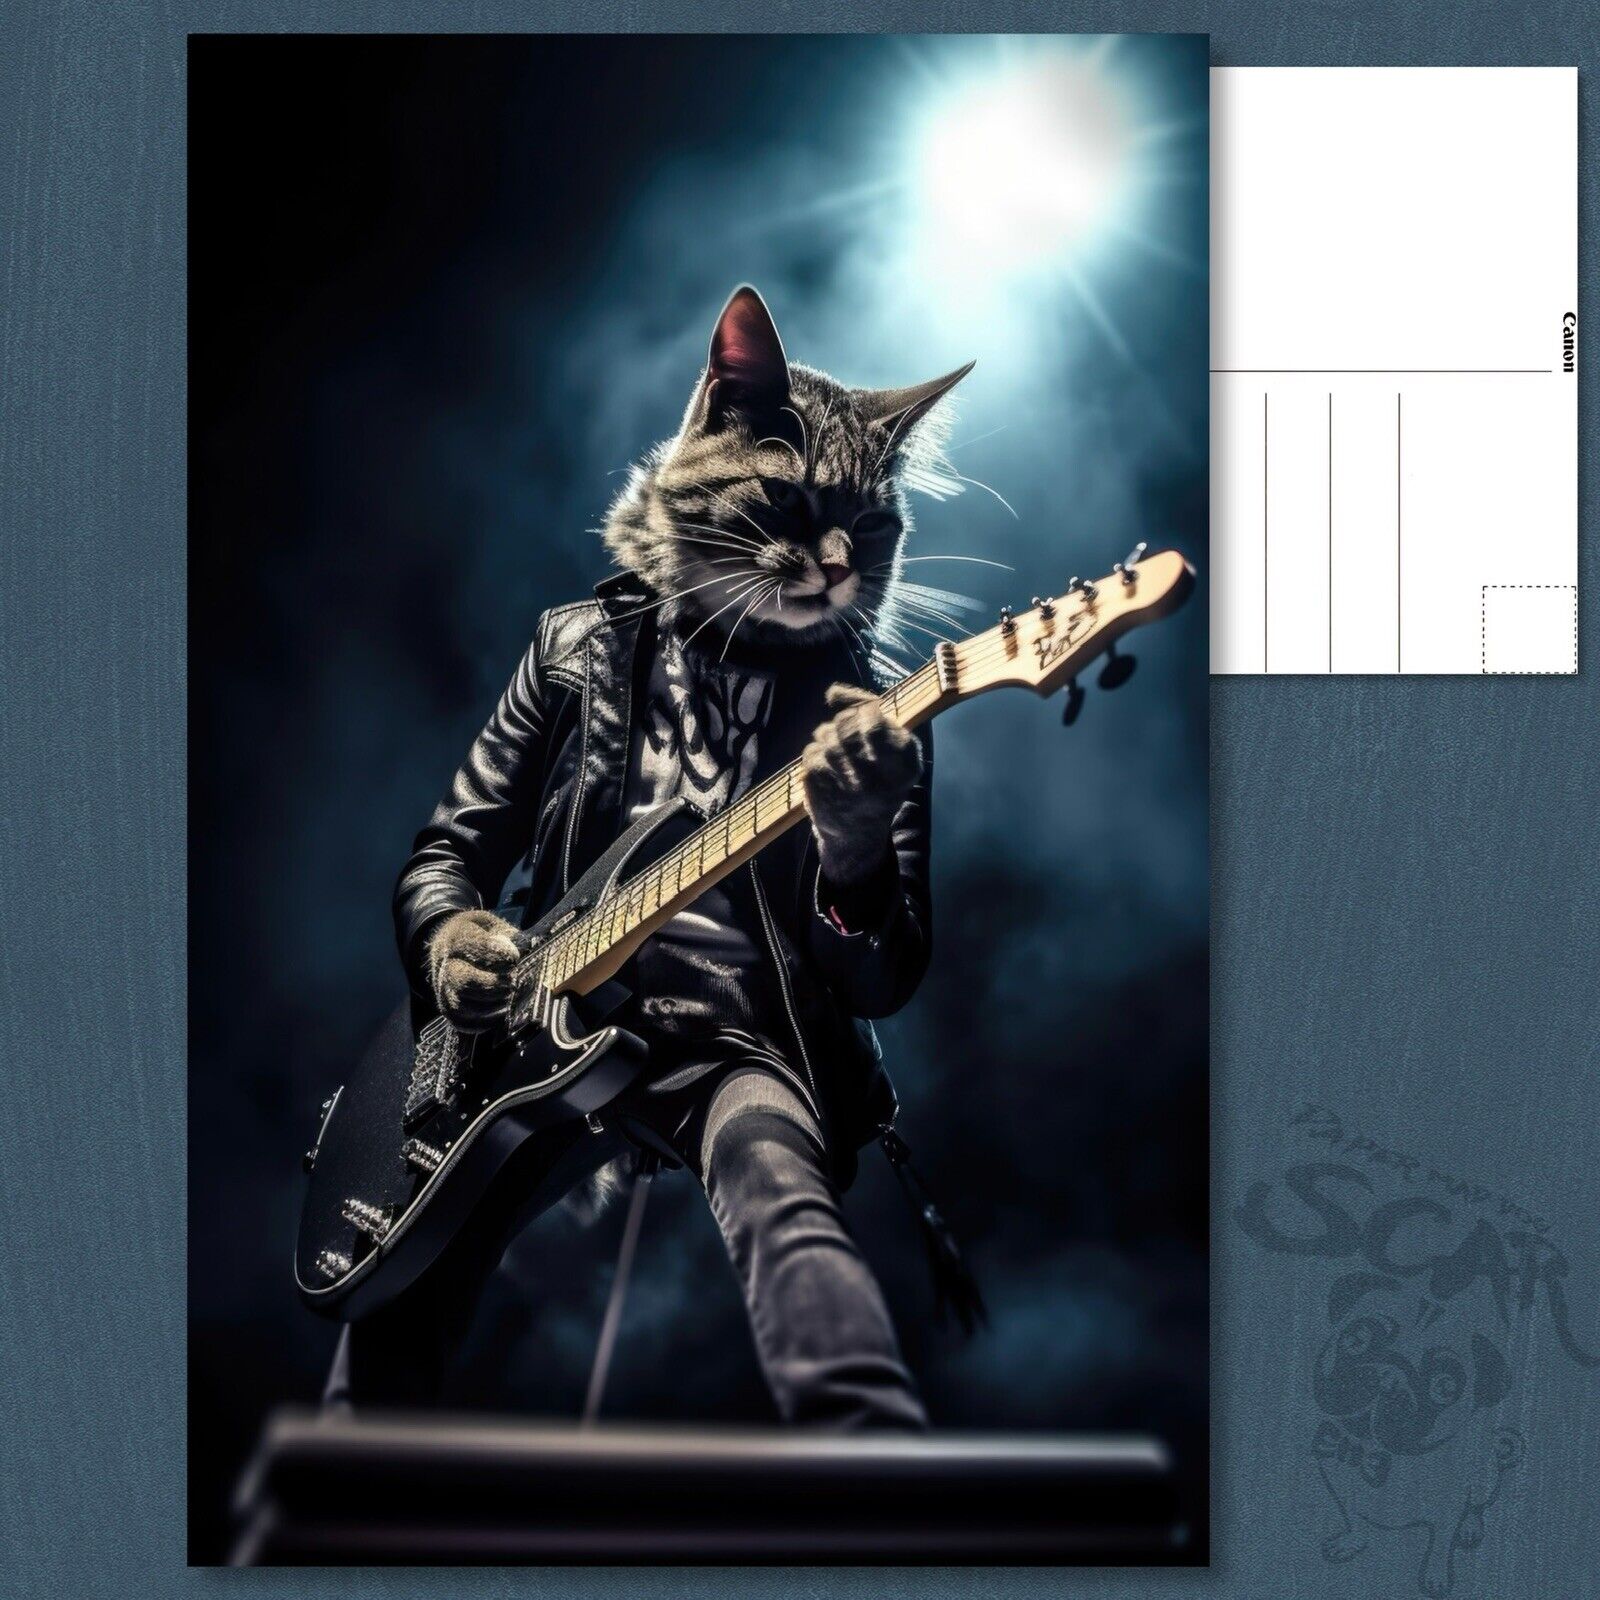 🐱🎸 Cat Playing Electric Guitar on Rock Stage - Purrfectly Rockin'￼ Postcard